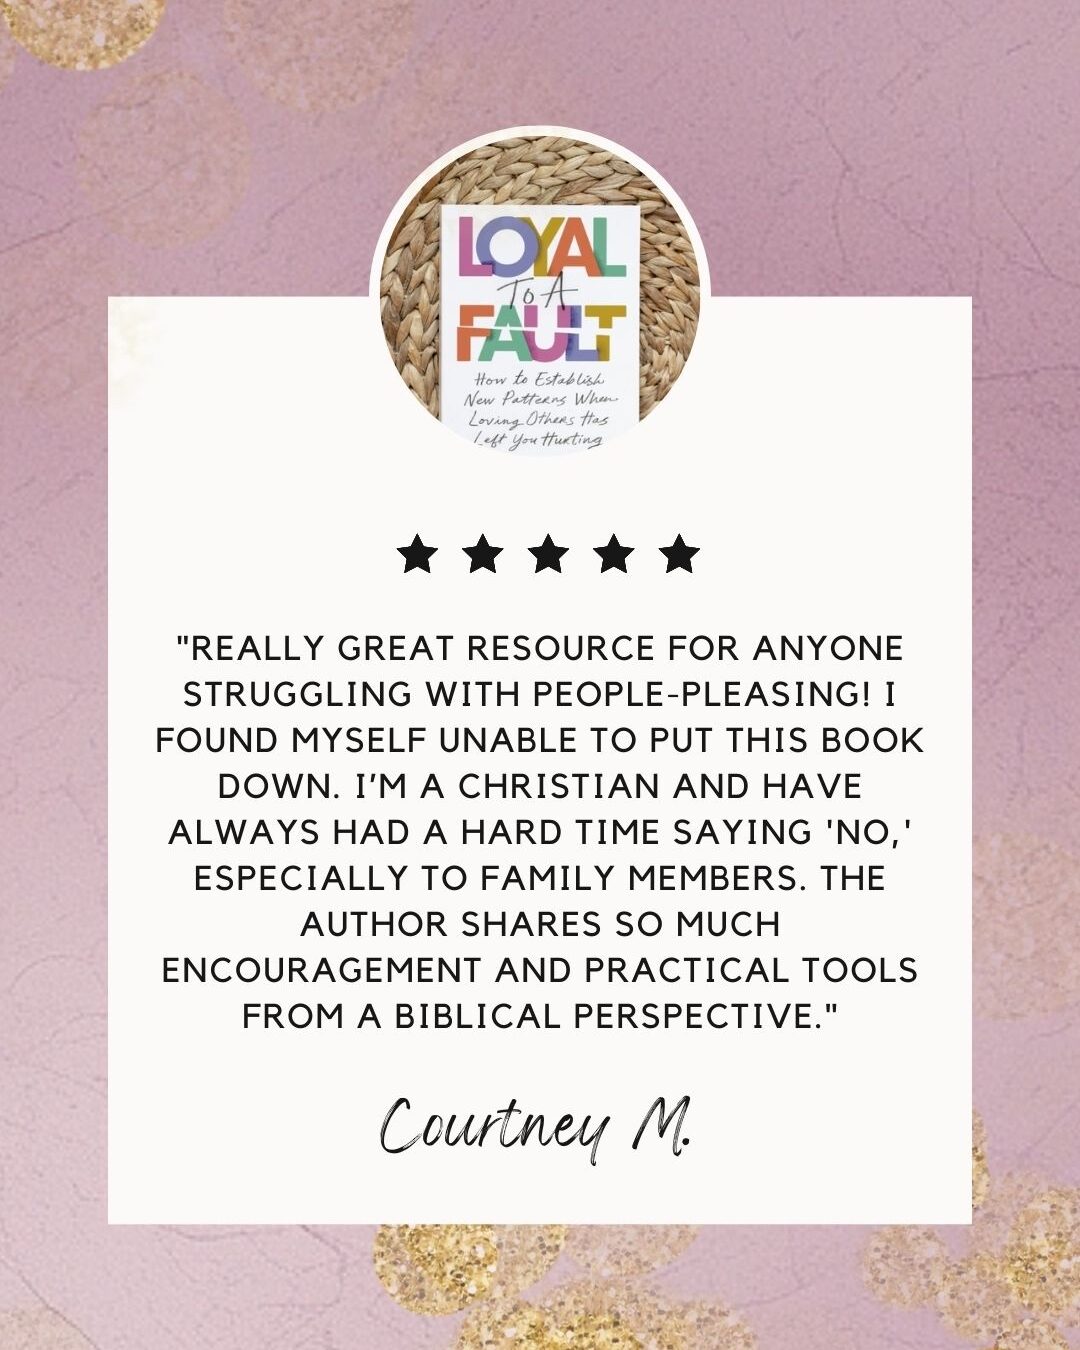 Customer review of Loyal To A Fault that says ""REALLY GREAT RESOURCE FOR ANYONE STRUGGLING WITH PEOPLE-PLEASING! I FOUND MYSELF UNABLE TO PUT THIS BOOK DOWN. I'M A CHRISTIAN AND HAVE ALWAYS HAD A HARD TIME SAYING 'NO,' ESPECIALLY TO FAMILY MEMBERS. THE AUTHOR SHARES SO MUCH ENCOURAGEMENT AND PRACTICAL TOOLS FROM A BIBLICAL PERSPECTIVE."